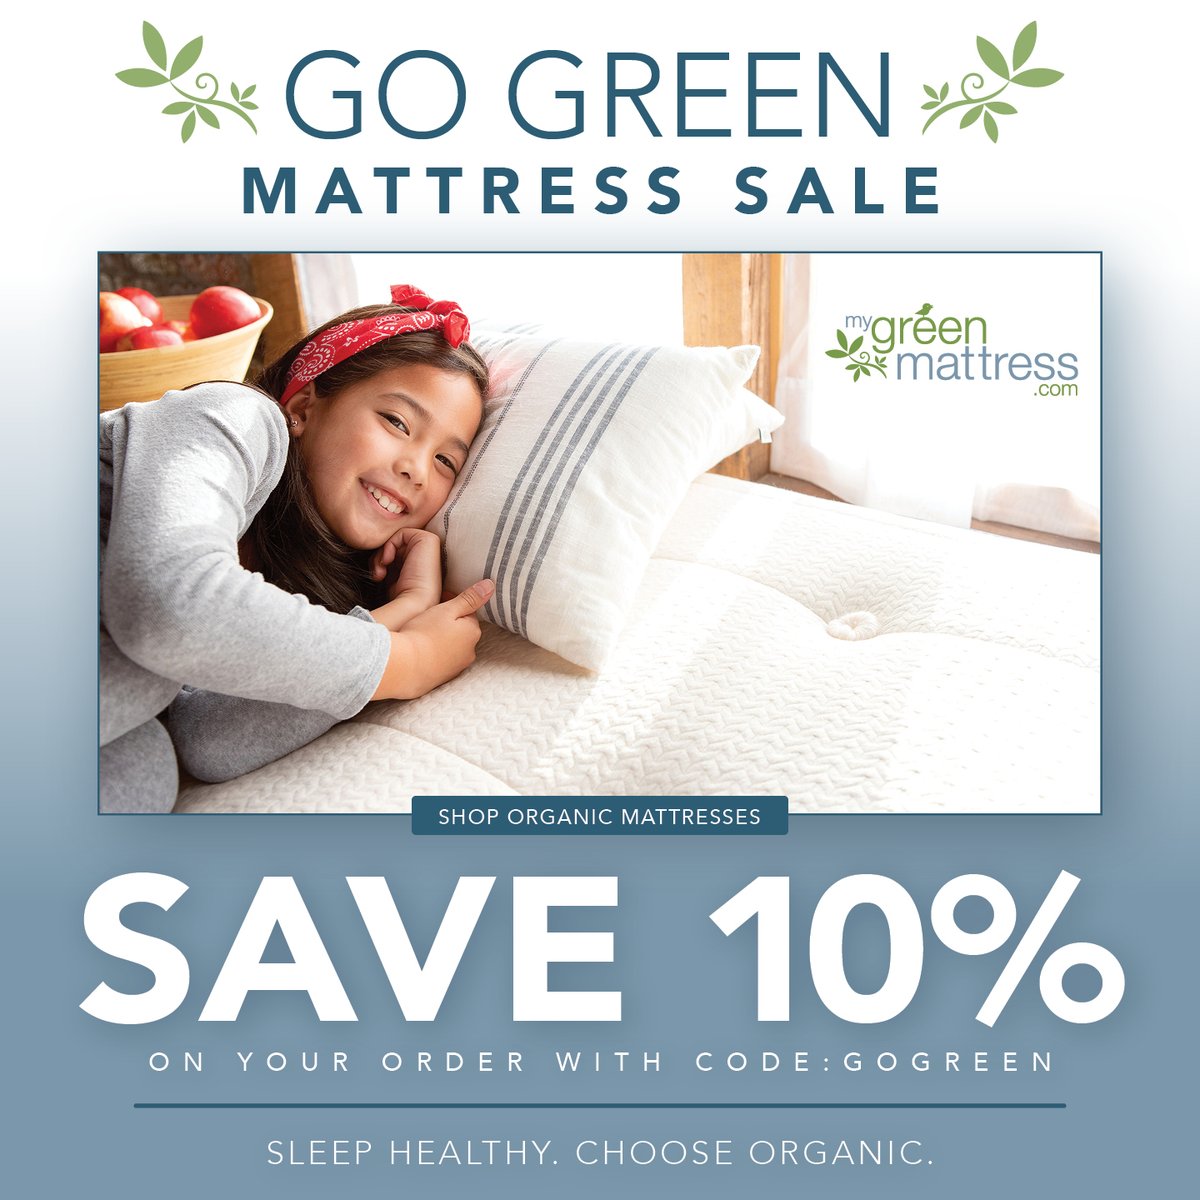 Shop our selection of healthy, certified organic mattresses and bedding and Save 10% on your order with code: GoGreen. Some exclusions may apply. #HealthySleep #GreenMattress #SustainableHome